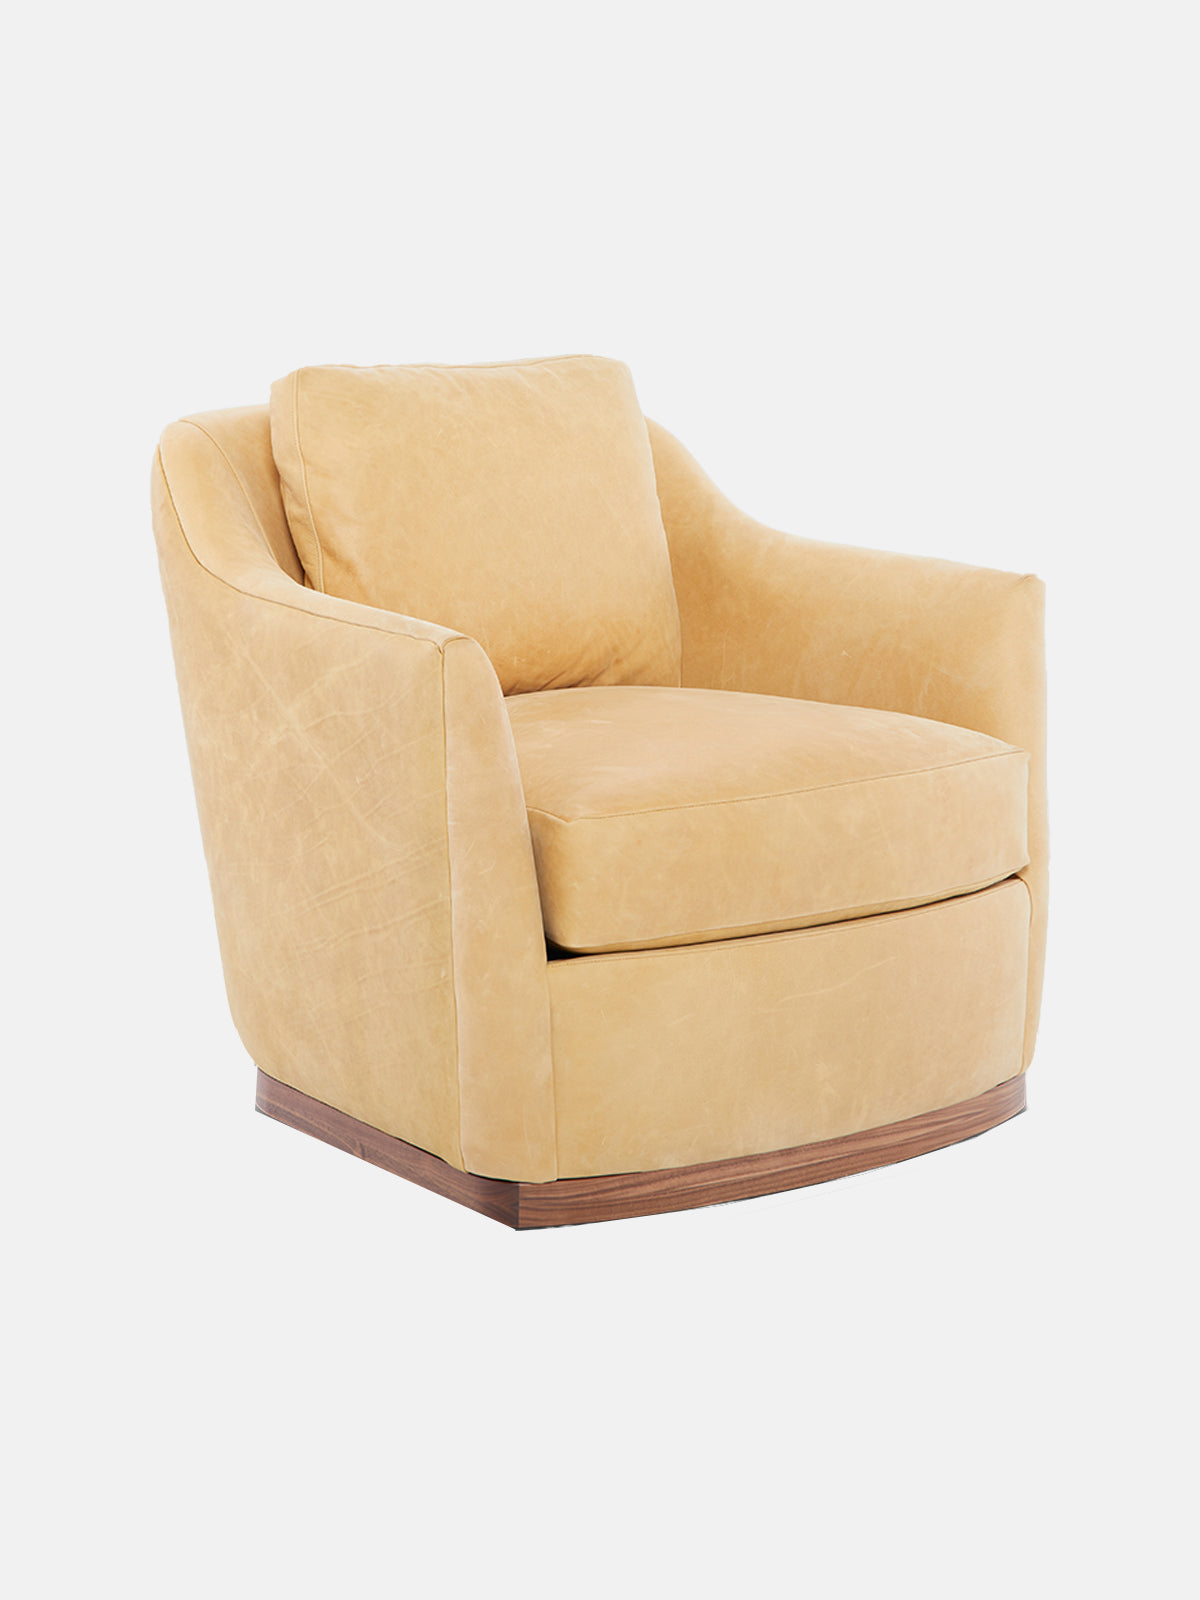 Remy Leather Swivel Chair